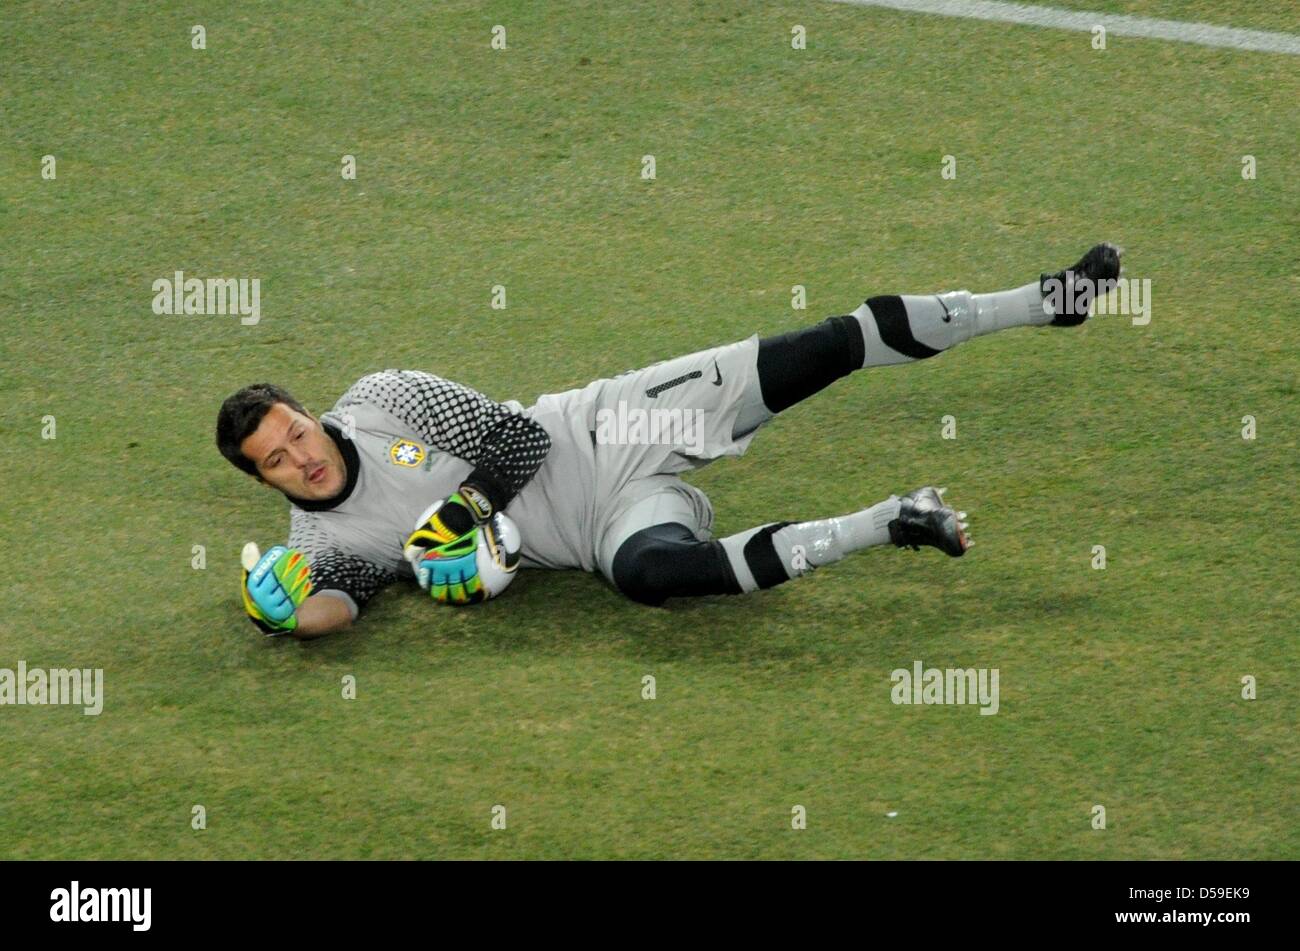 Brazil's goalkeeper Julio Cesar catches the ball during the 2010 FIFA World Cup group G match between Brazil and Ivory Coast at Soccer City Stadium in Johannesburg, South Africa 20 June 2010. Photo: Marcus Brandt dpa - Please refer to http://dpaq.de/FIFA-WM2010-TC Stock Photo